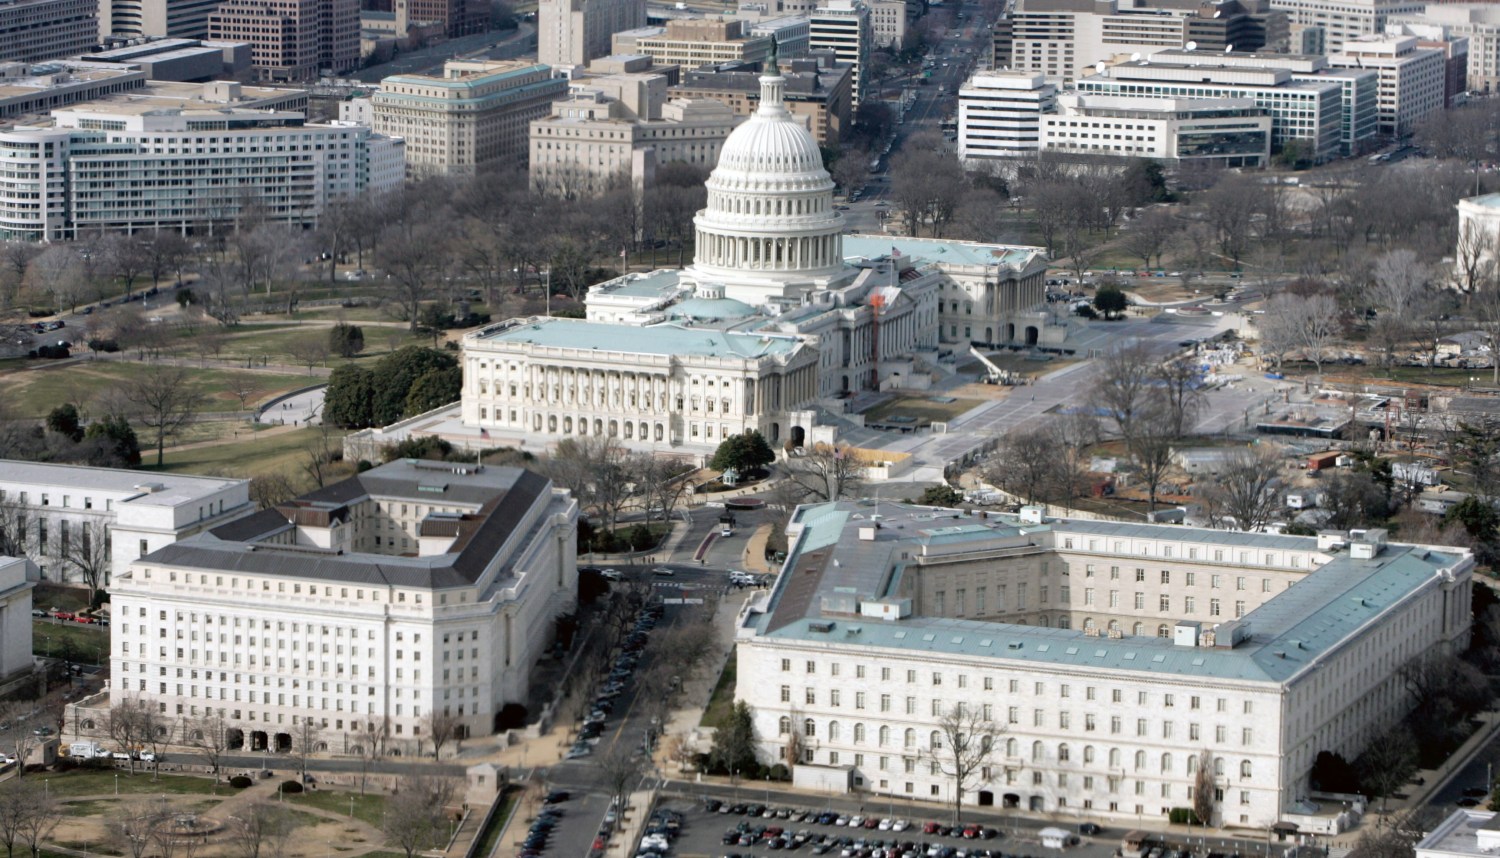 The U.S. Capitol and (from L to R) Rayburn House Office Building, Longworth House Office Building, and Cannon House Office Building, photographed from the U.S. House of Representatives side of Capitol Hill from a U.S. Marine helicopter, February 10, 2006. REUTERS/Larry Downing - RP3DSFDKHLAB